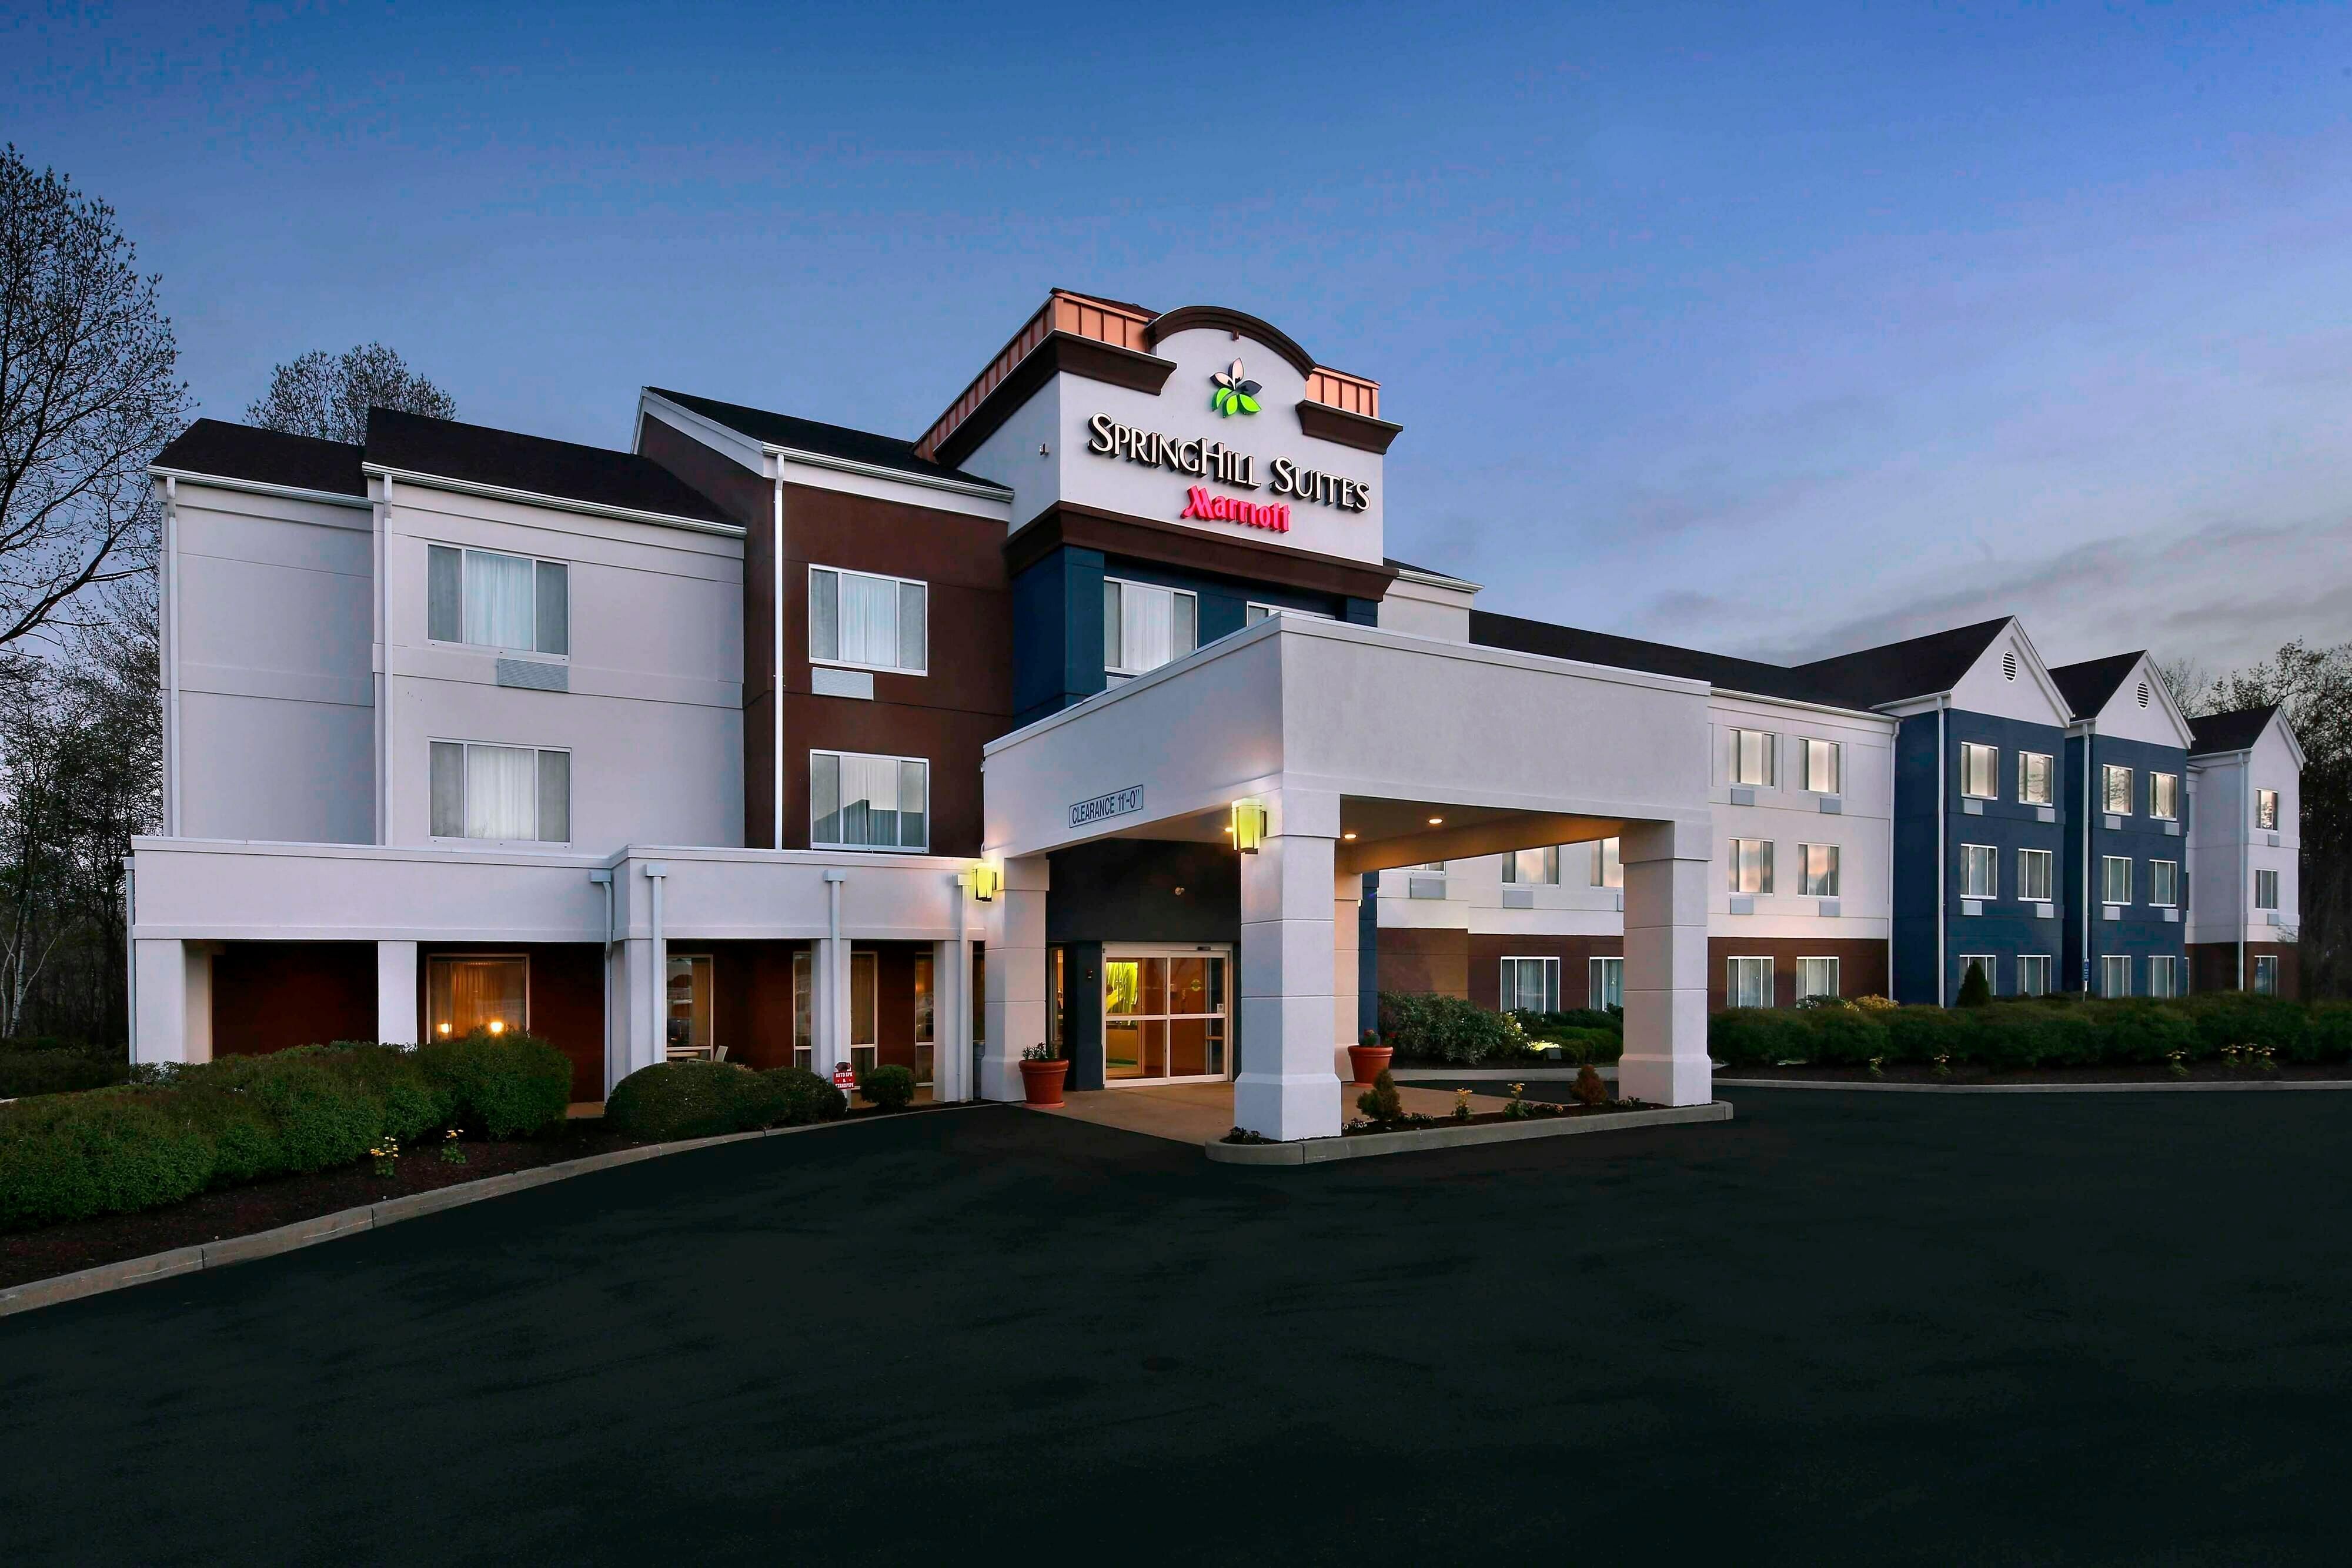 Photo of Springhill Suites Mystic Waterford, Waterford, CT